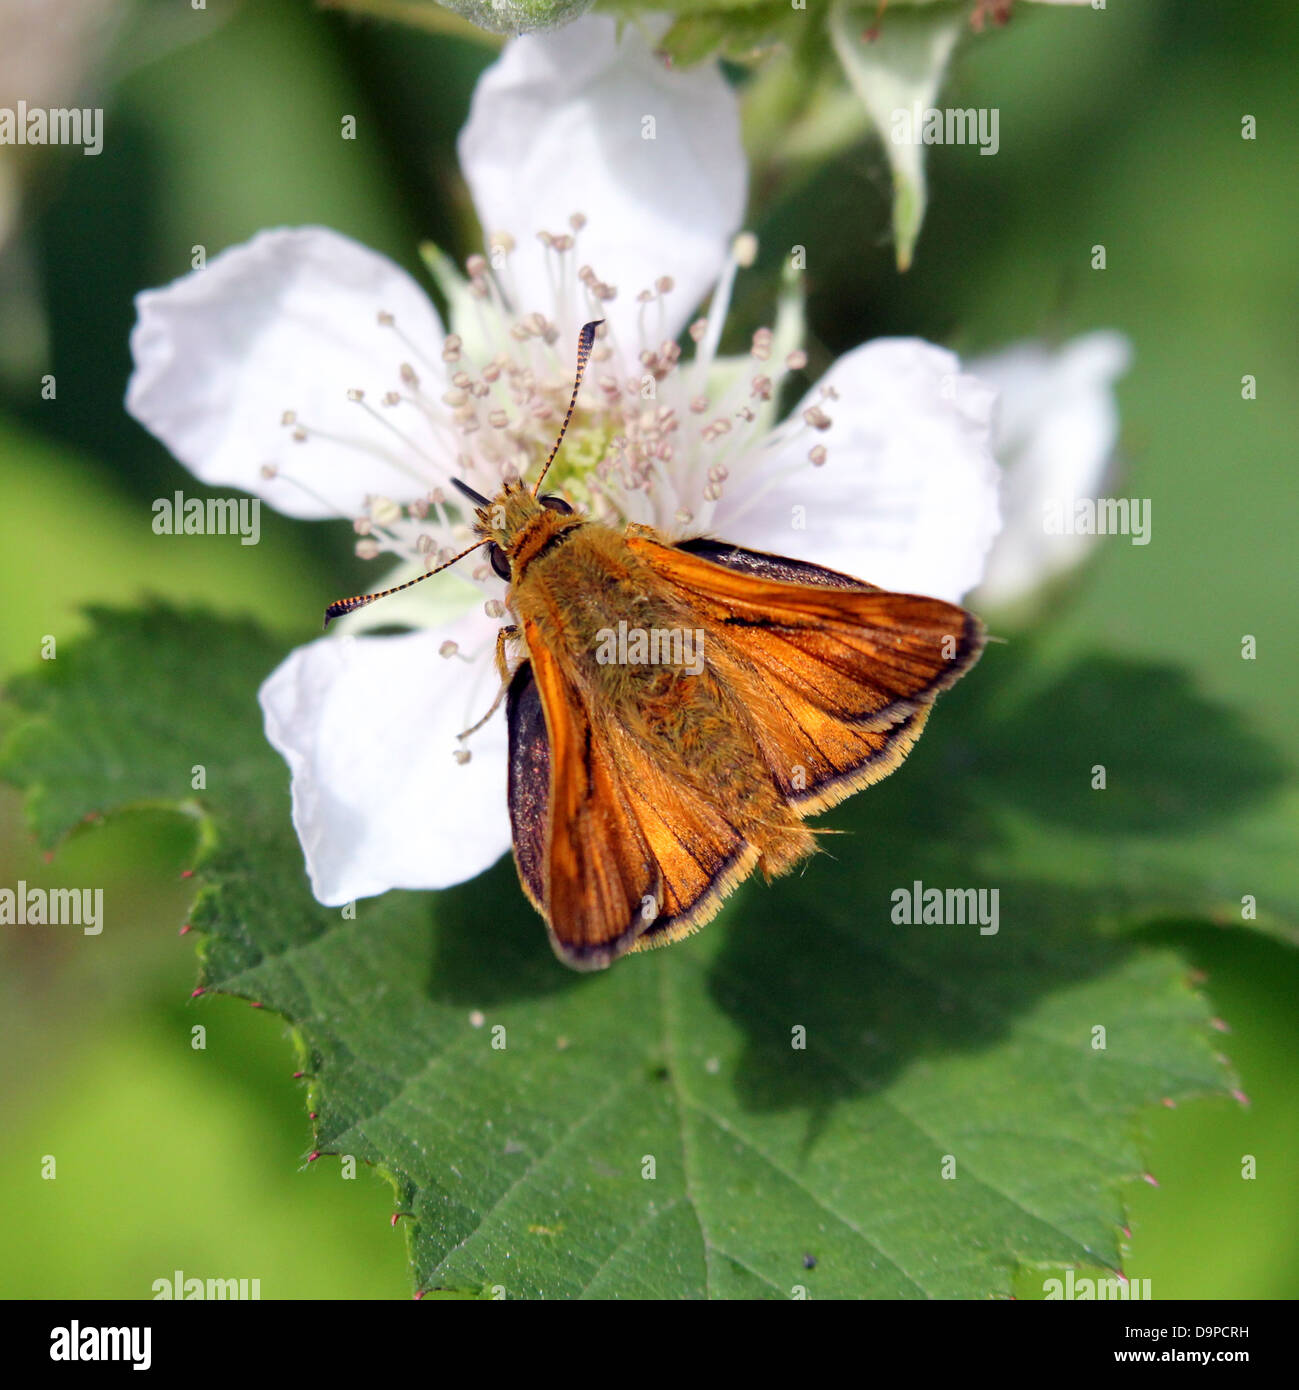 Macro close-up of the  Large Skipper butterfly (Ochlodes sylvanus) posing on a white blackberry flower (series of 5 images) Stock Photo